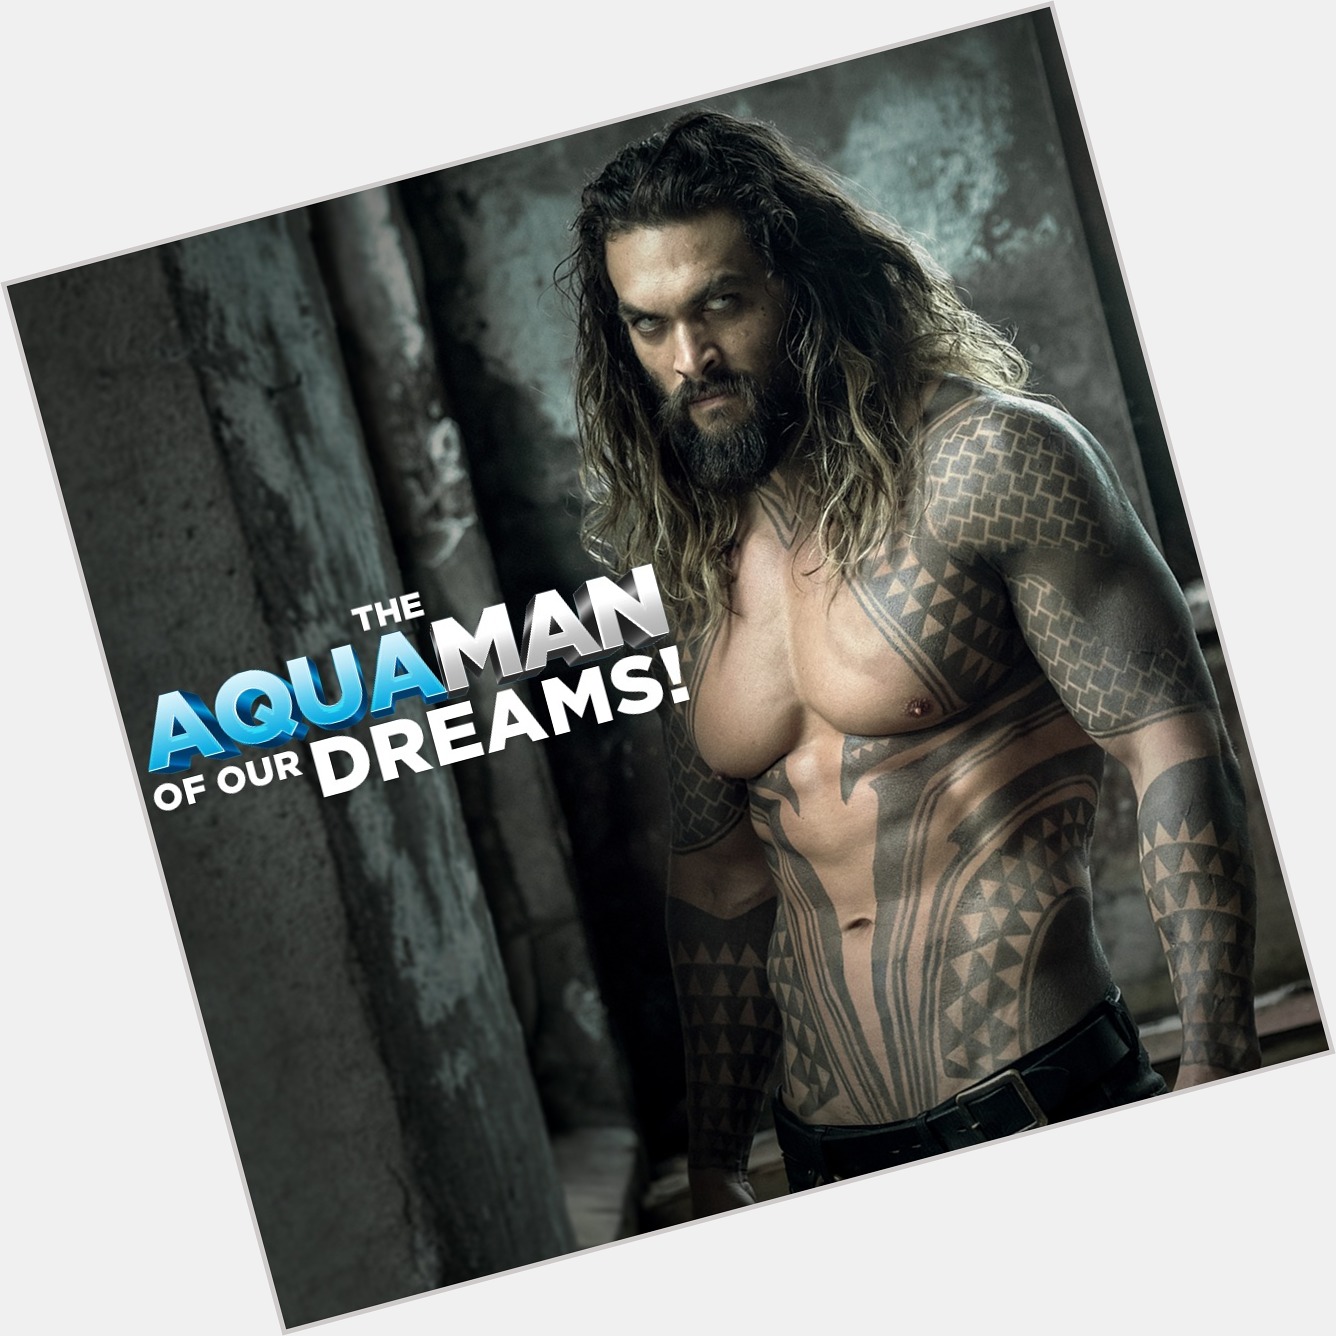 He rules the sea and our hearts. 

Happy birthday Jason Momoa, watching you on-screen is always a treat! 